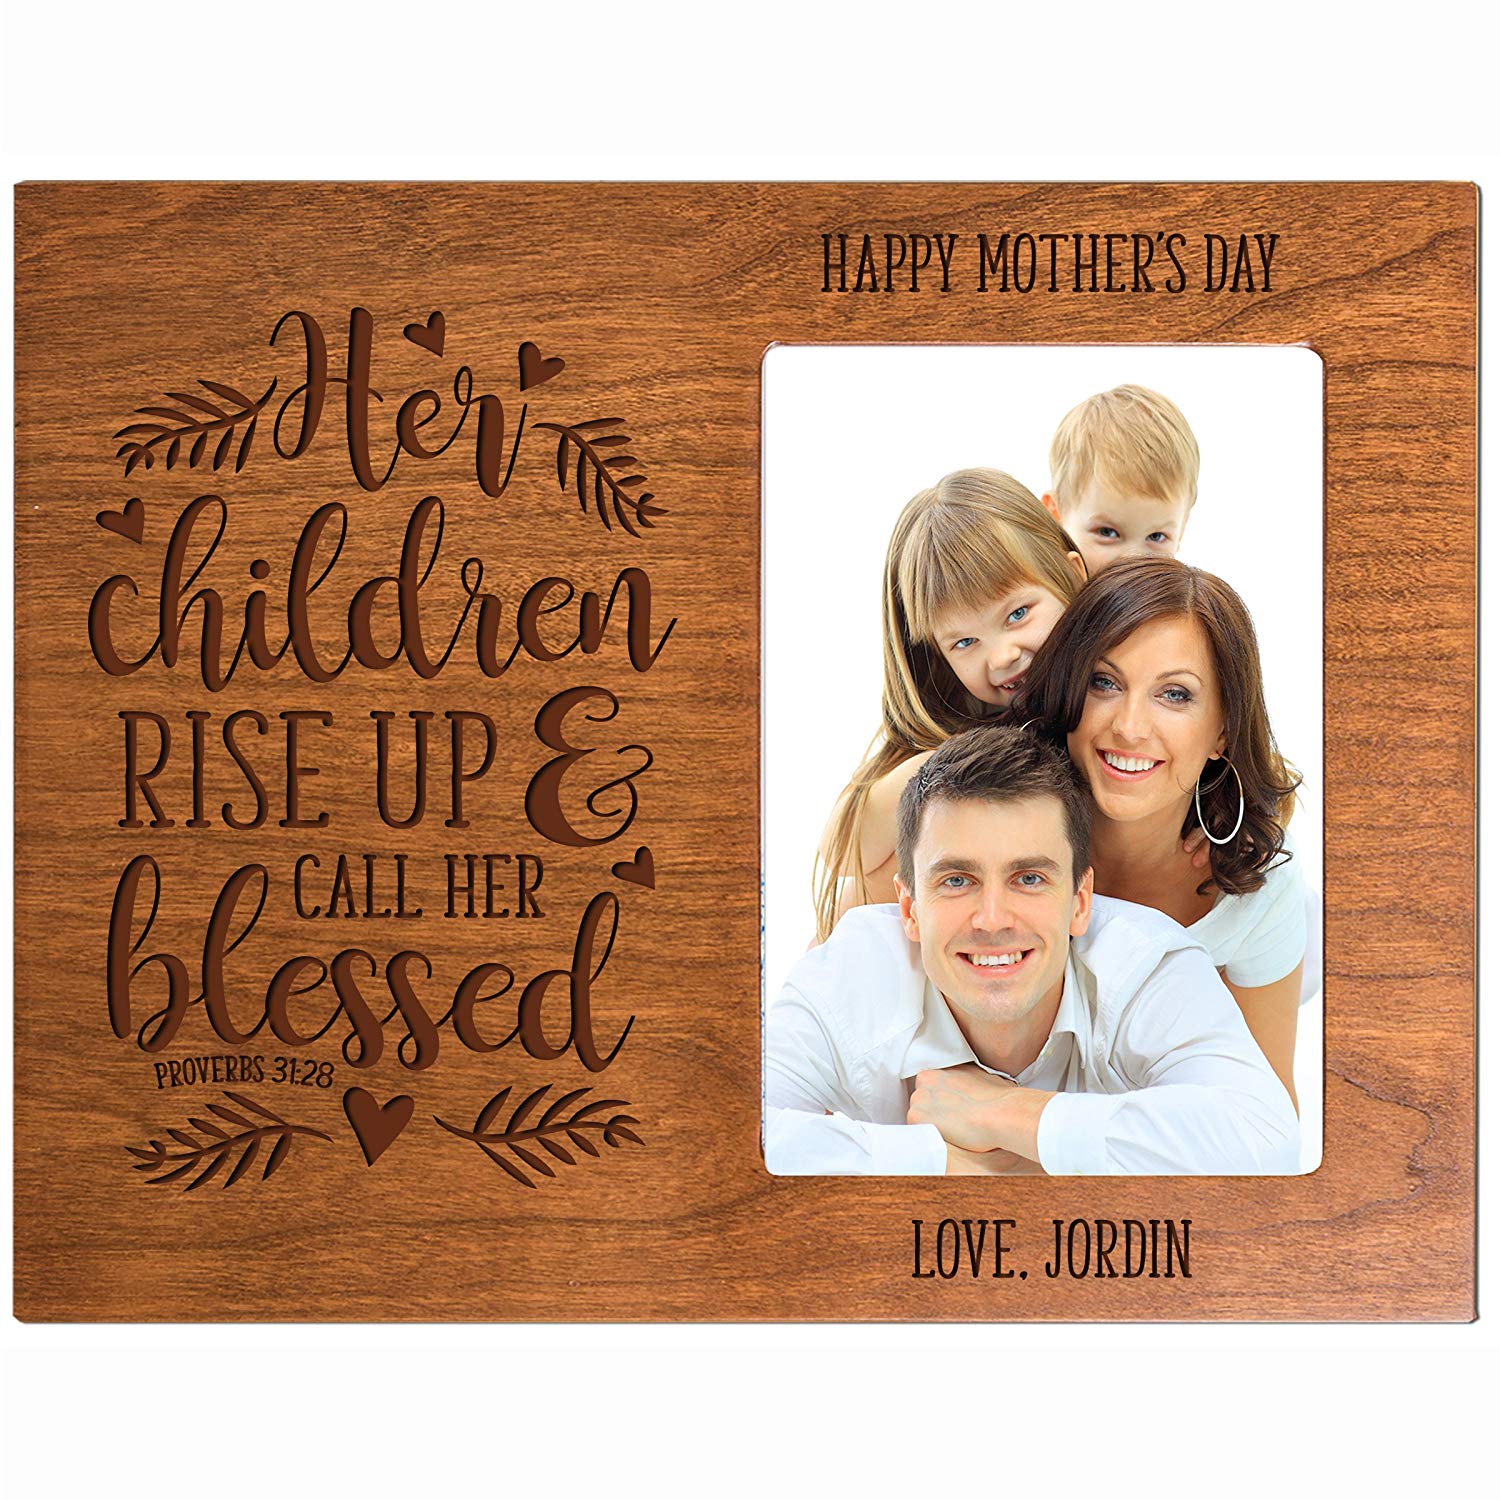 Personalized Happy Mother's Day Photo Frame - Her Children Rise Up